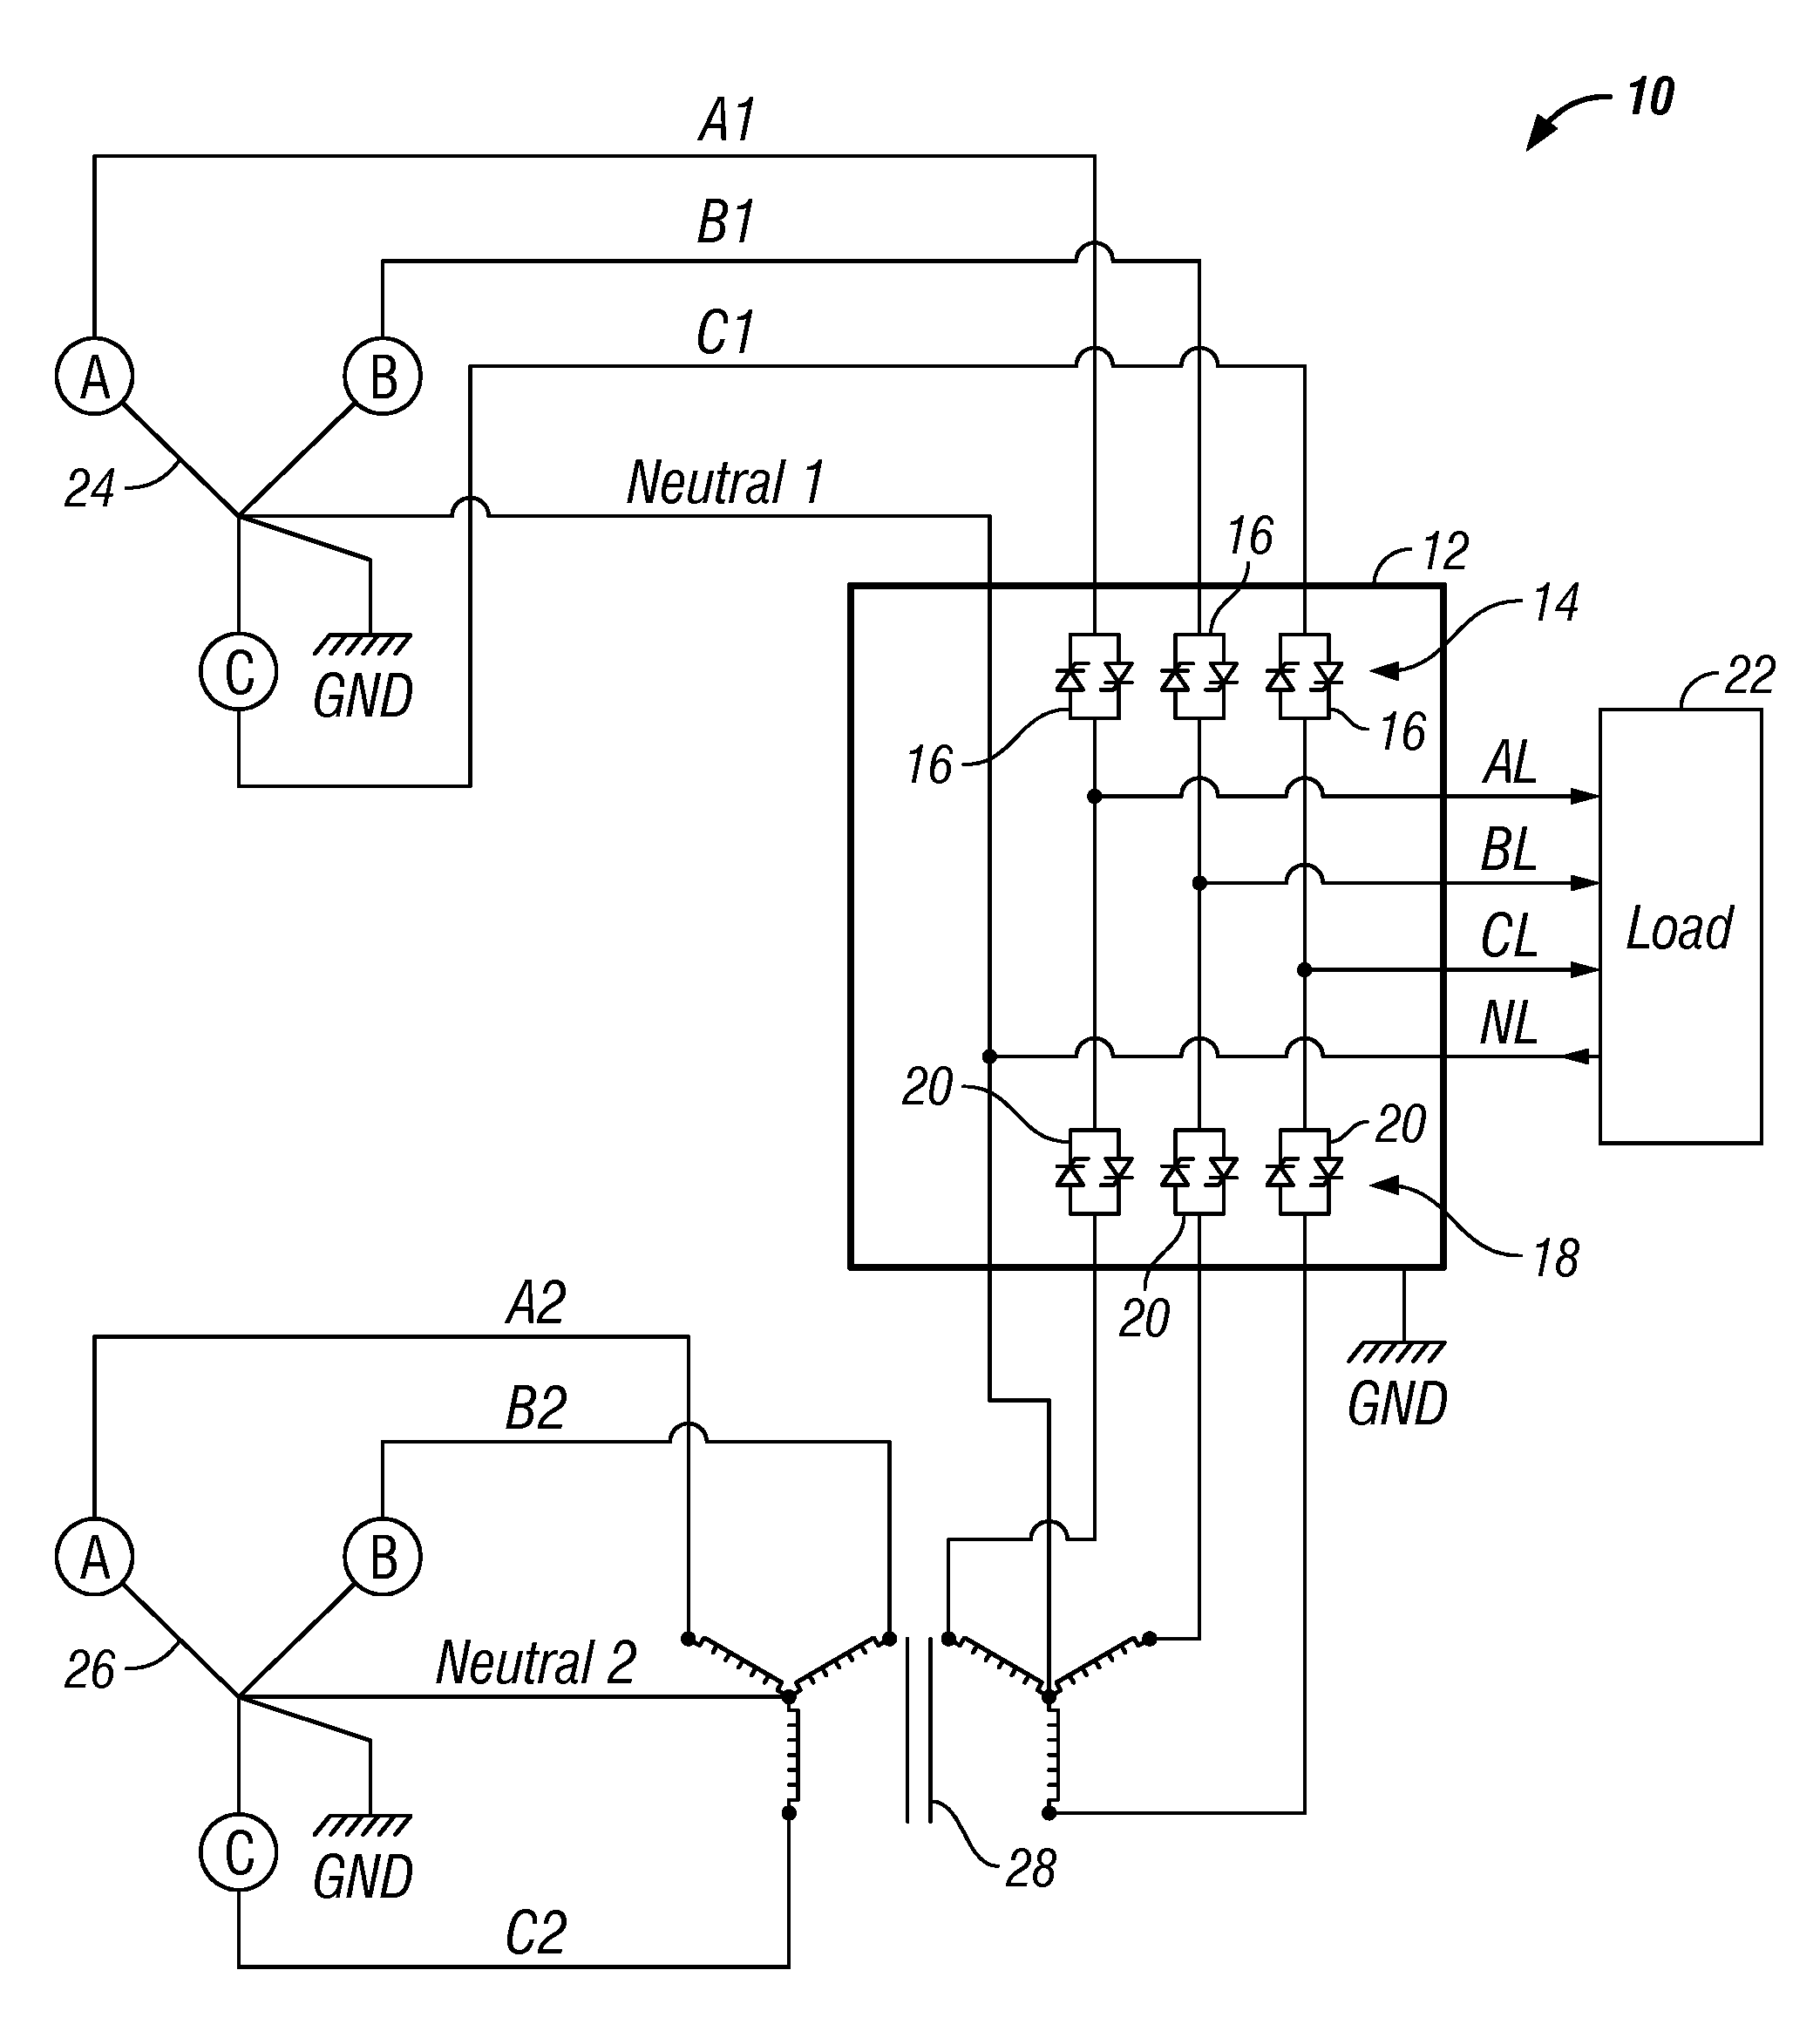 Transfer switch system with neutral current management